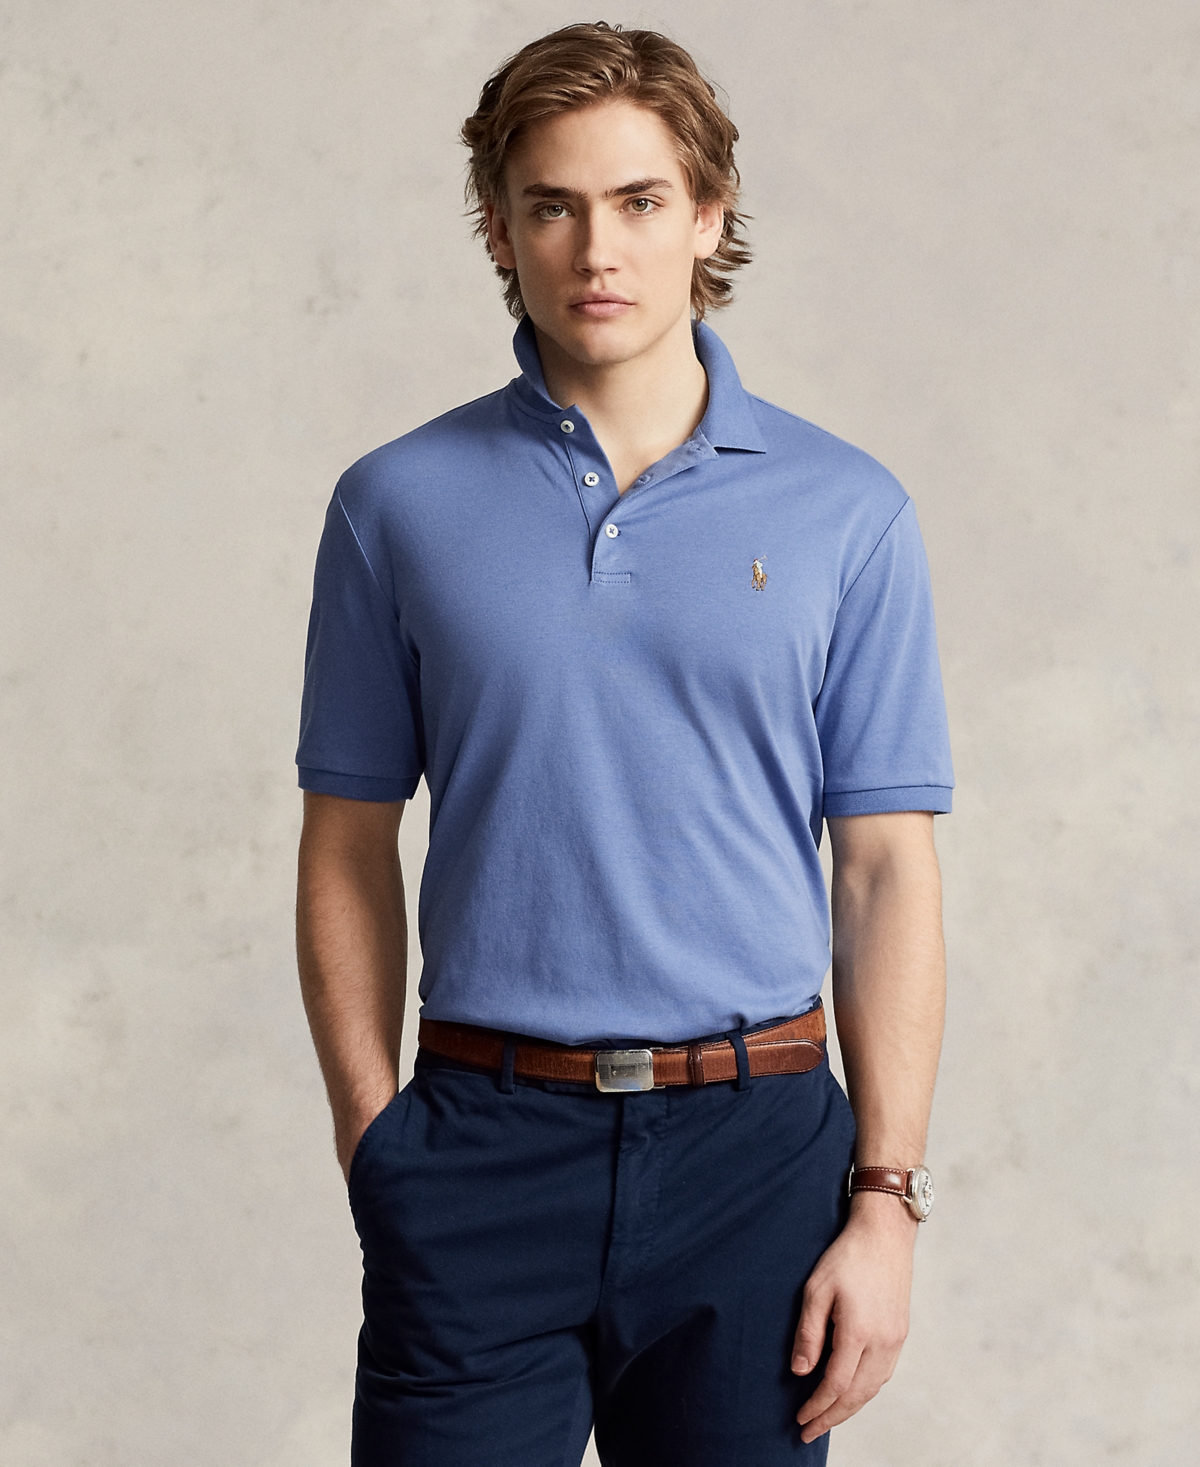 Polo Ralph Lauren Men's Classic Fit Soft Cotton Polo - French Navy